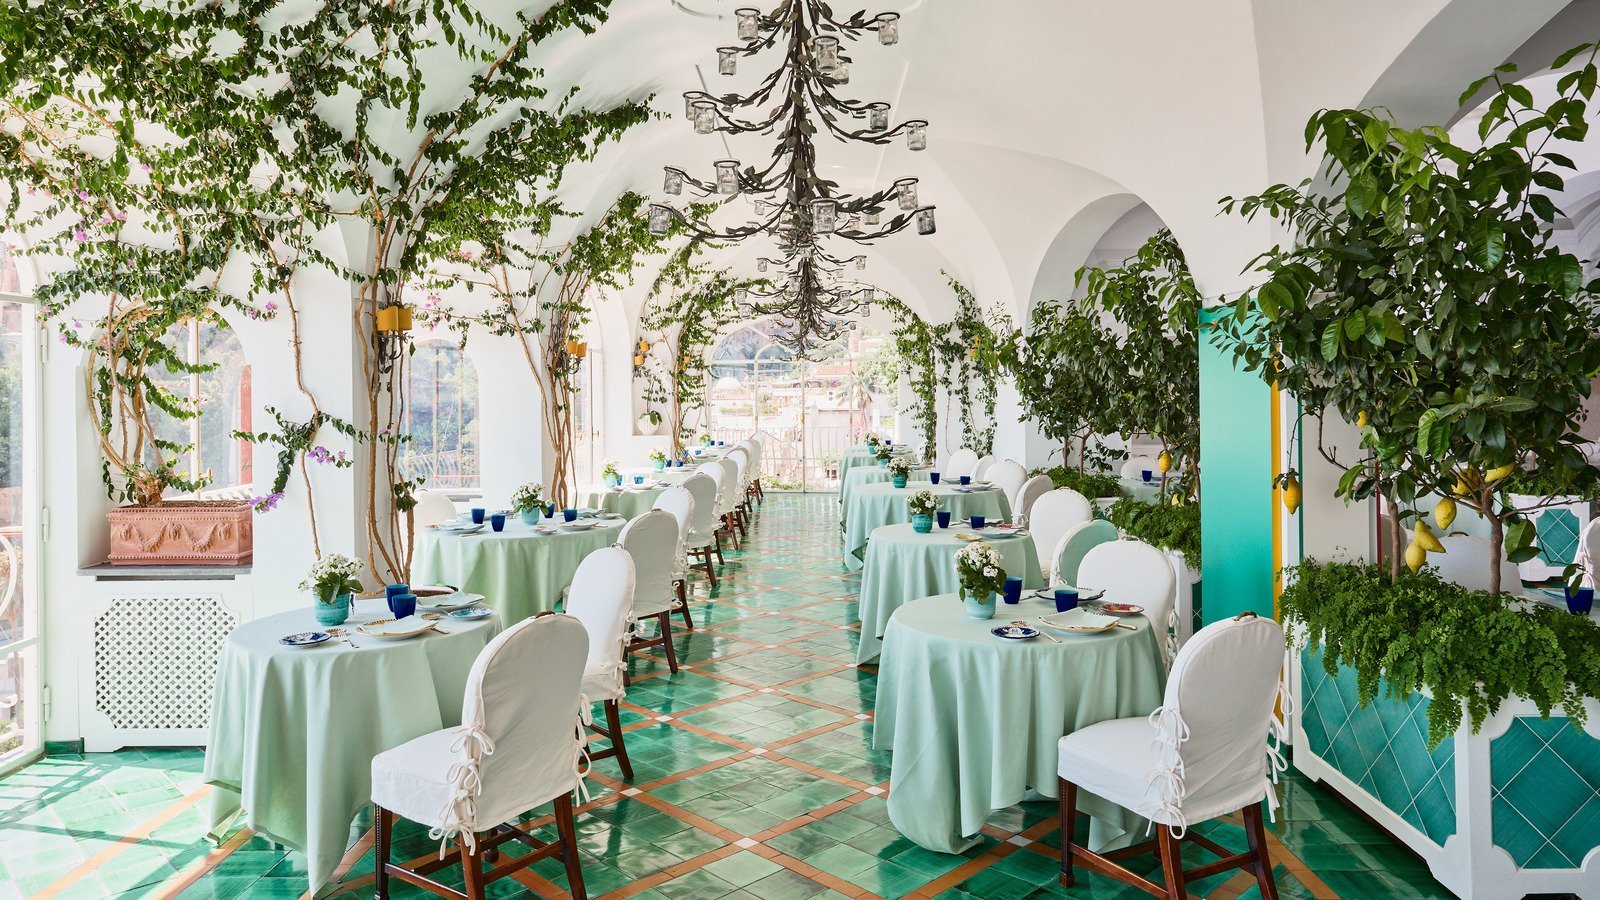 Have You Been To One Of The World's Most Beautiful Restaurants?